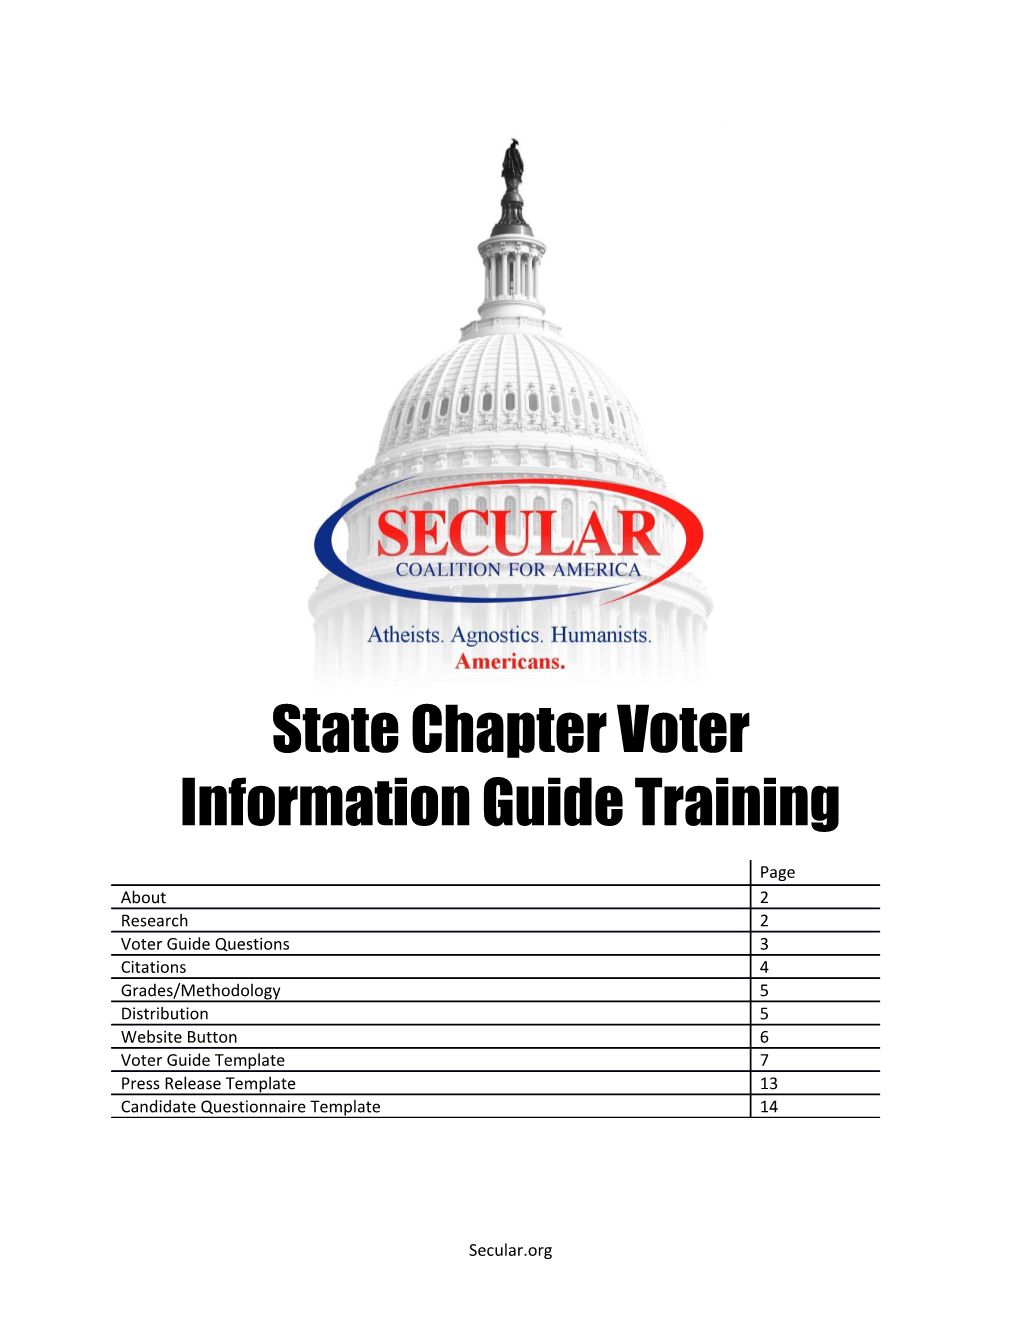 State Chaptervoter Information Guide Training